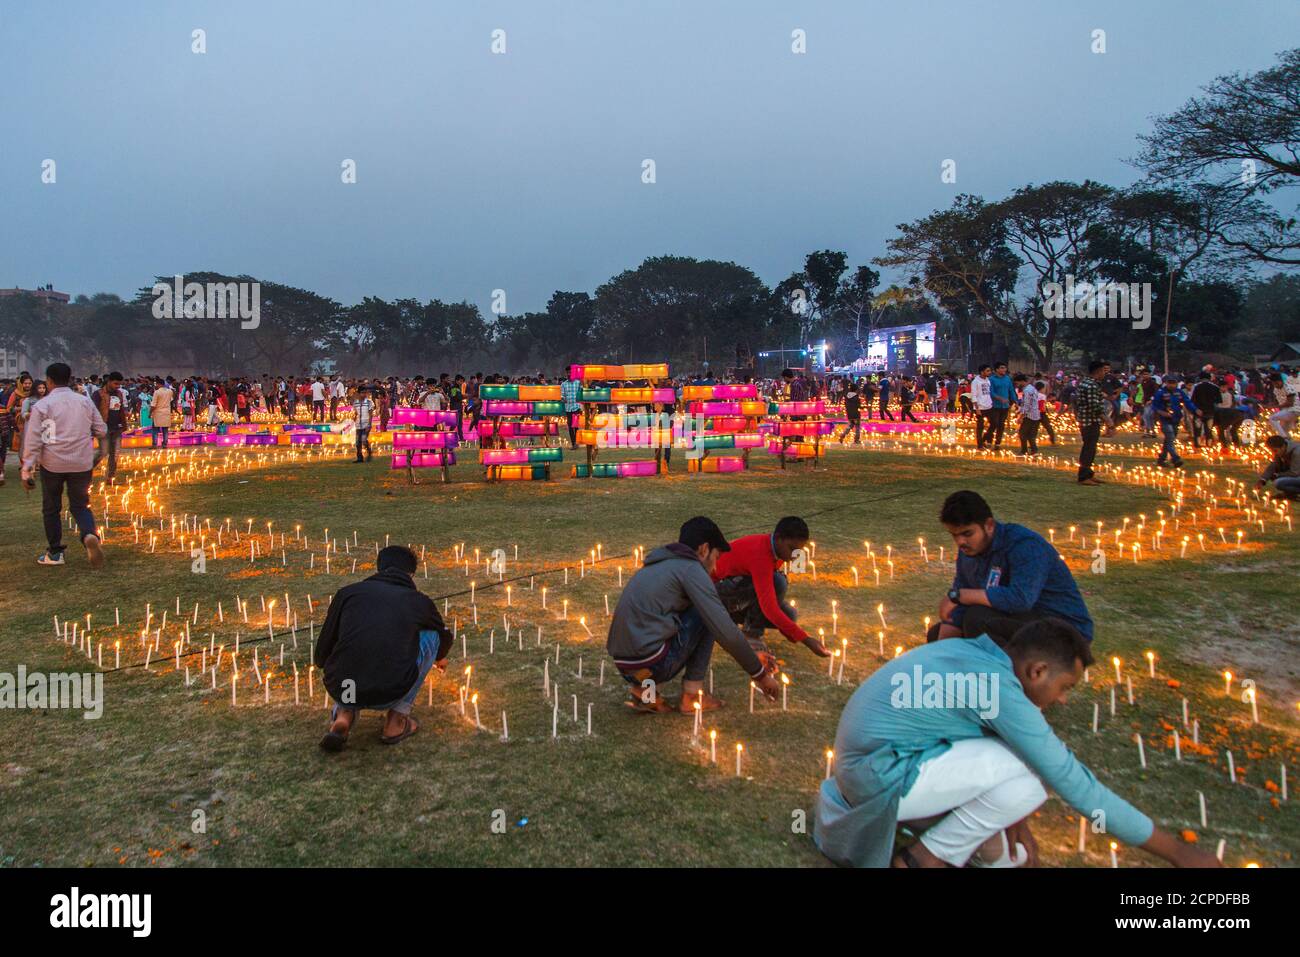 A grand function in remembrance of the martyrs of the language movement, Ekushey Udjapan Committee of Narail arranges one-lakh candles lighting in Kor Stock Photo